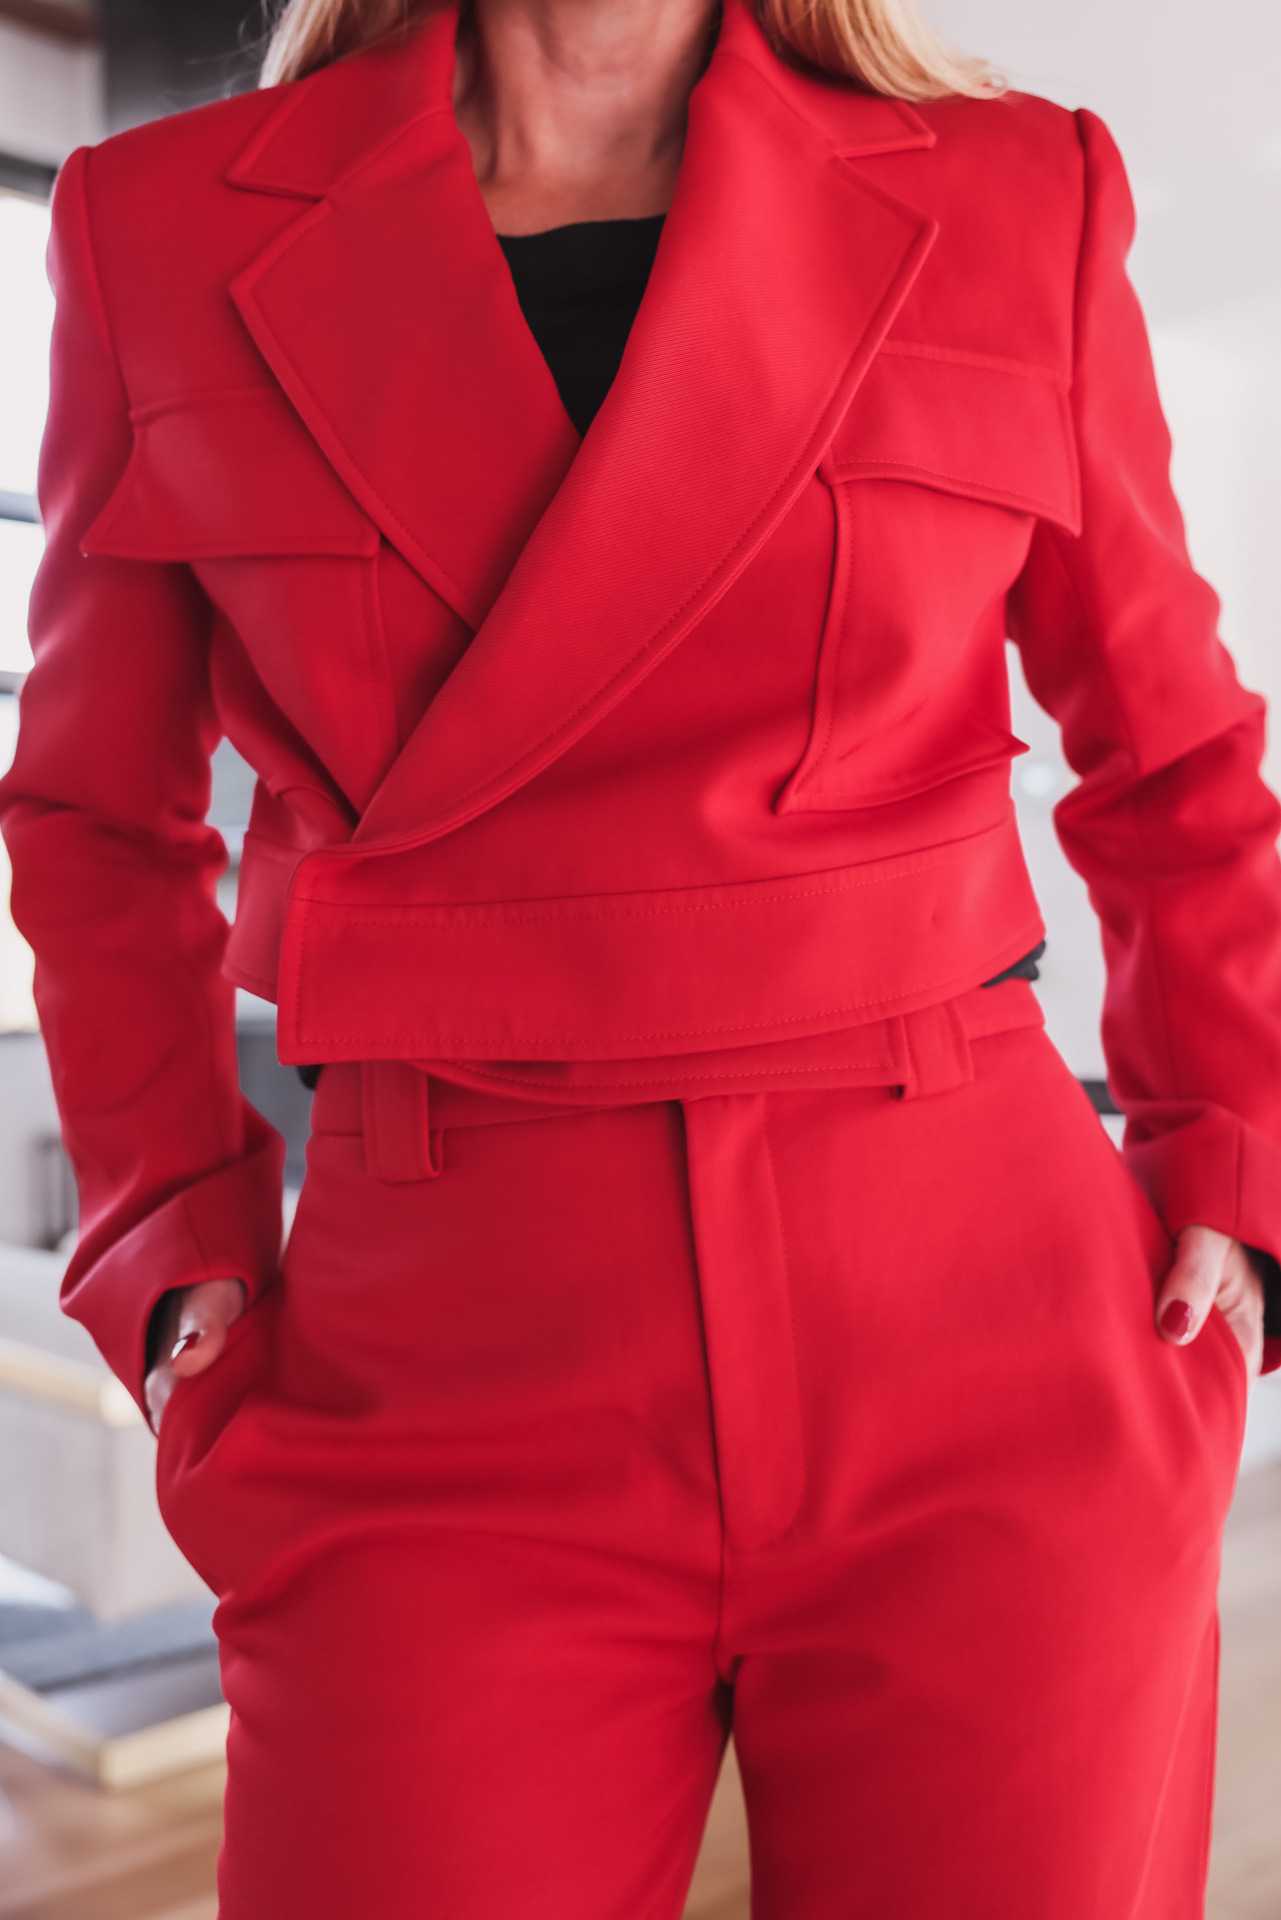 A.L.C Red Jacket